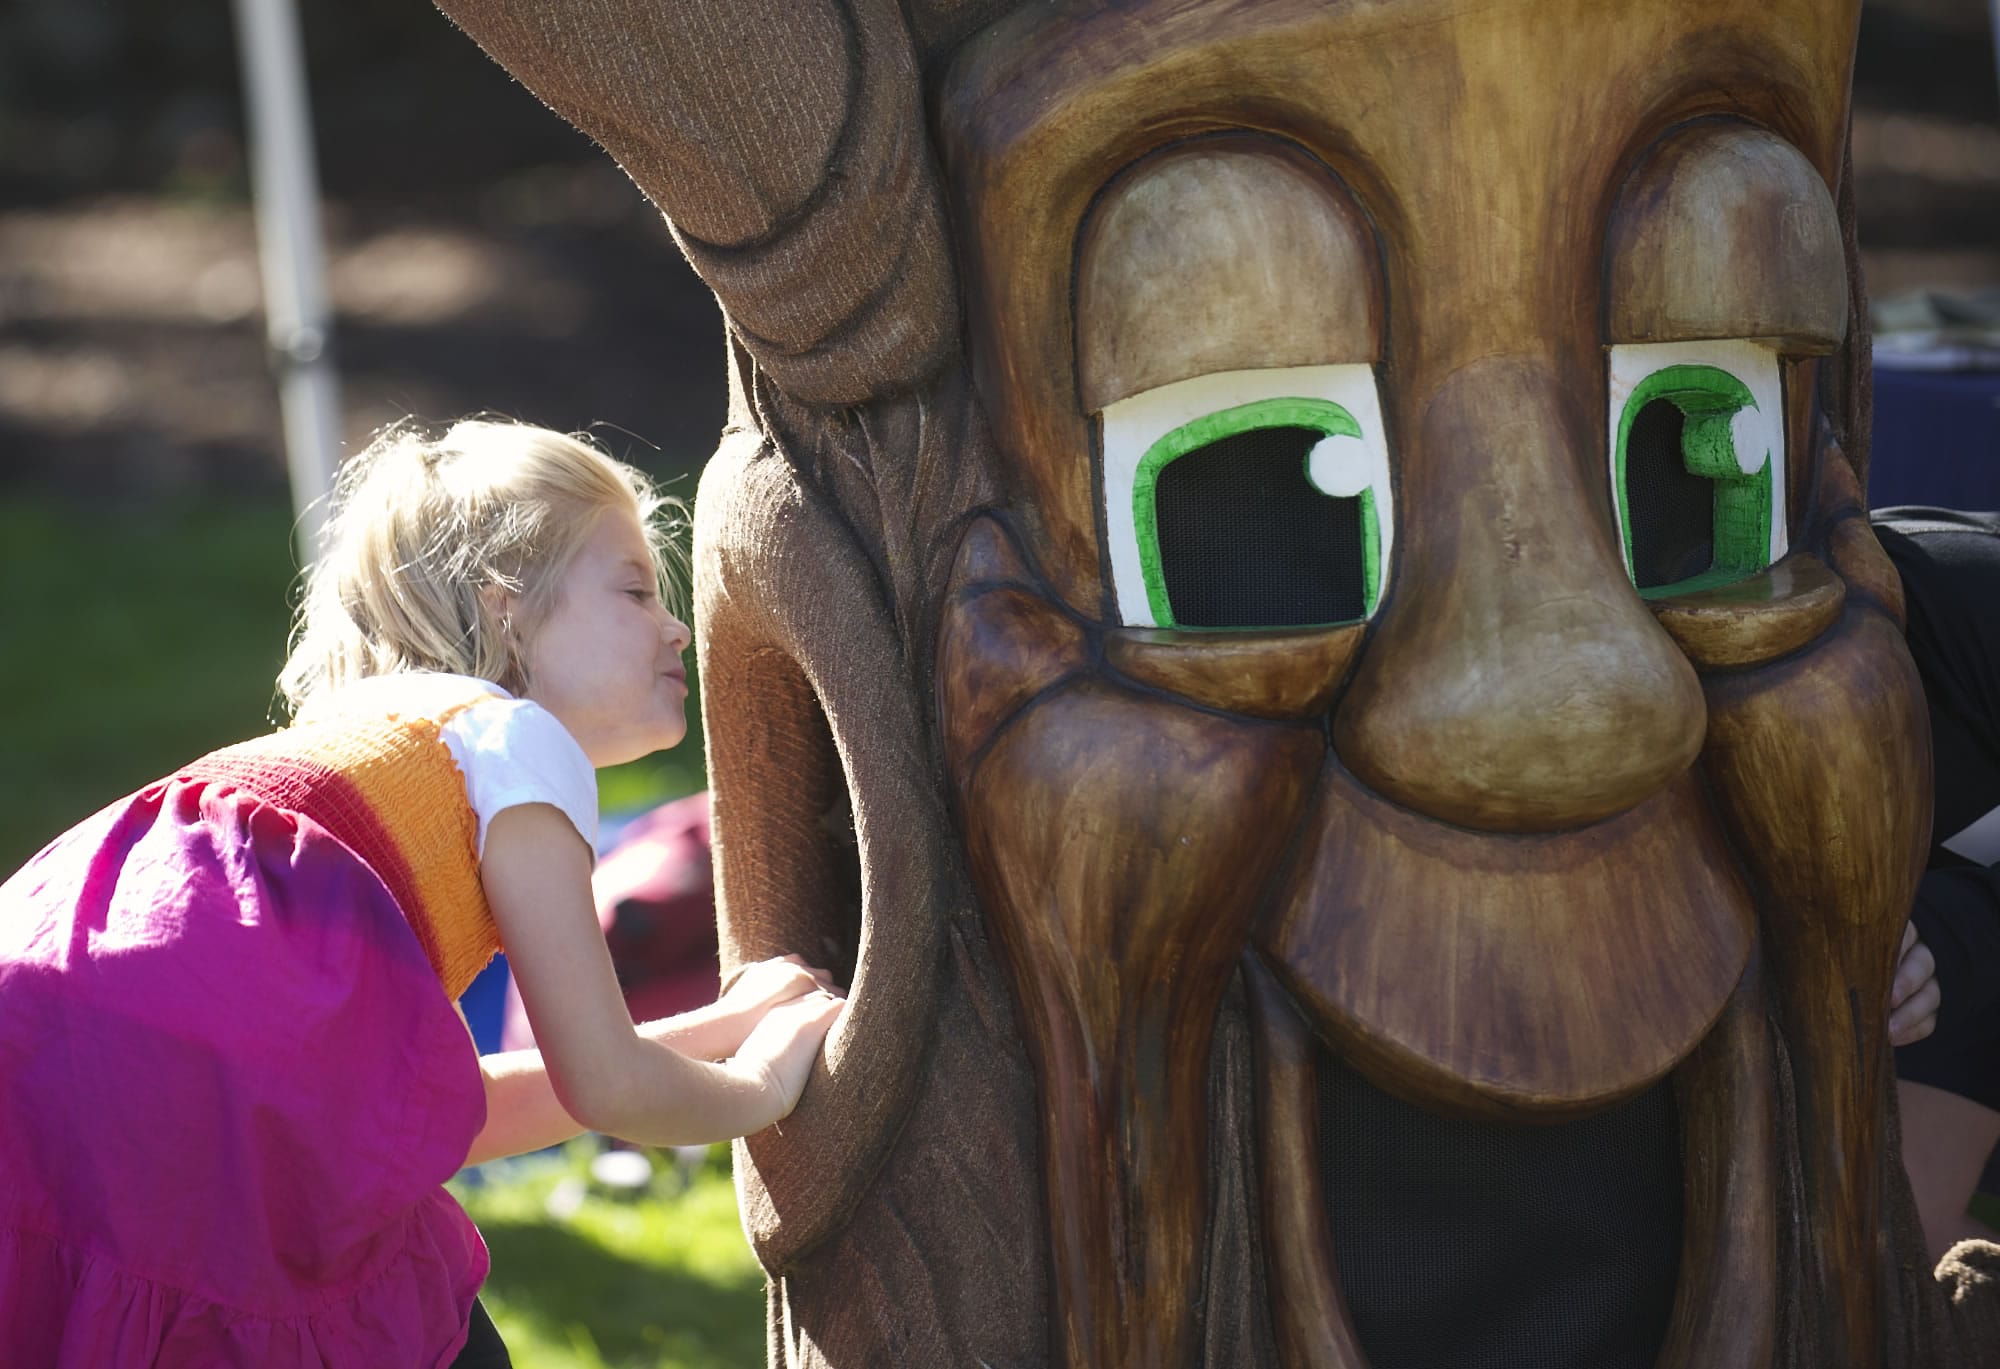 Natalie Oneil, 7, of Vancouver, looks inside an empty tree costume at the Old Apple Tree Festival on Saturday.